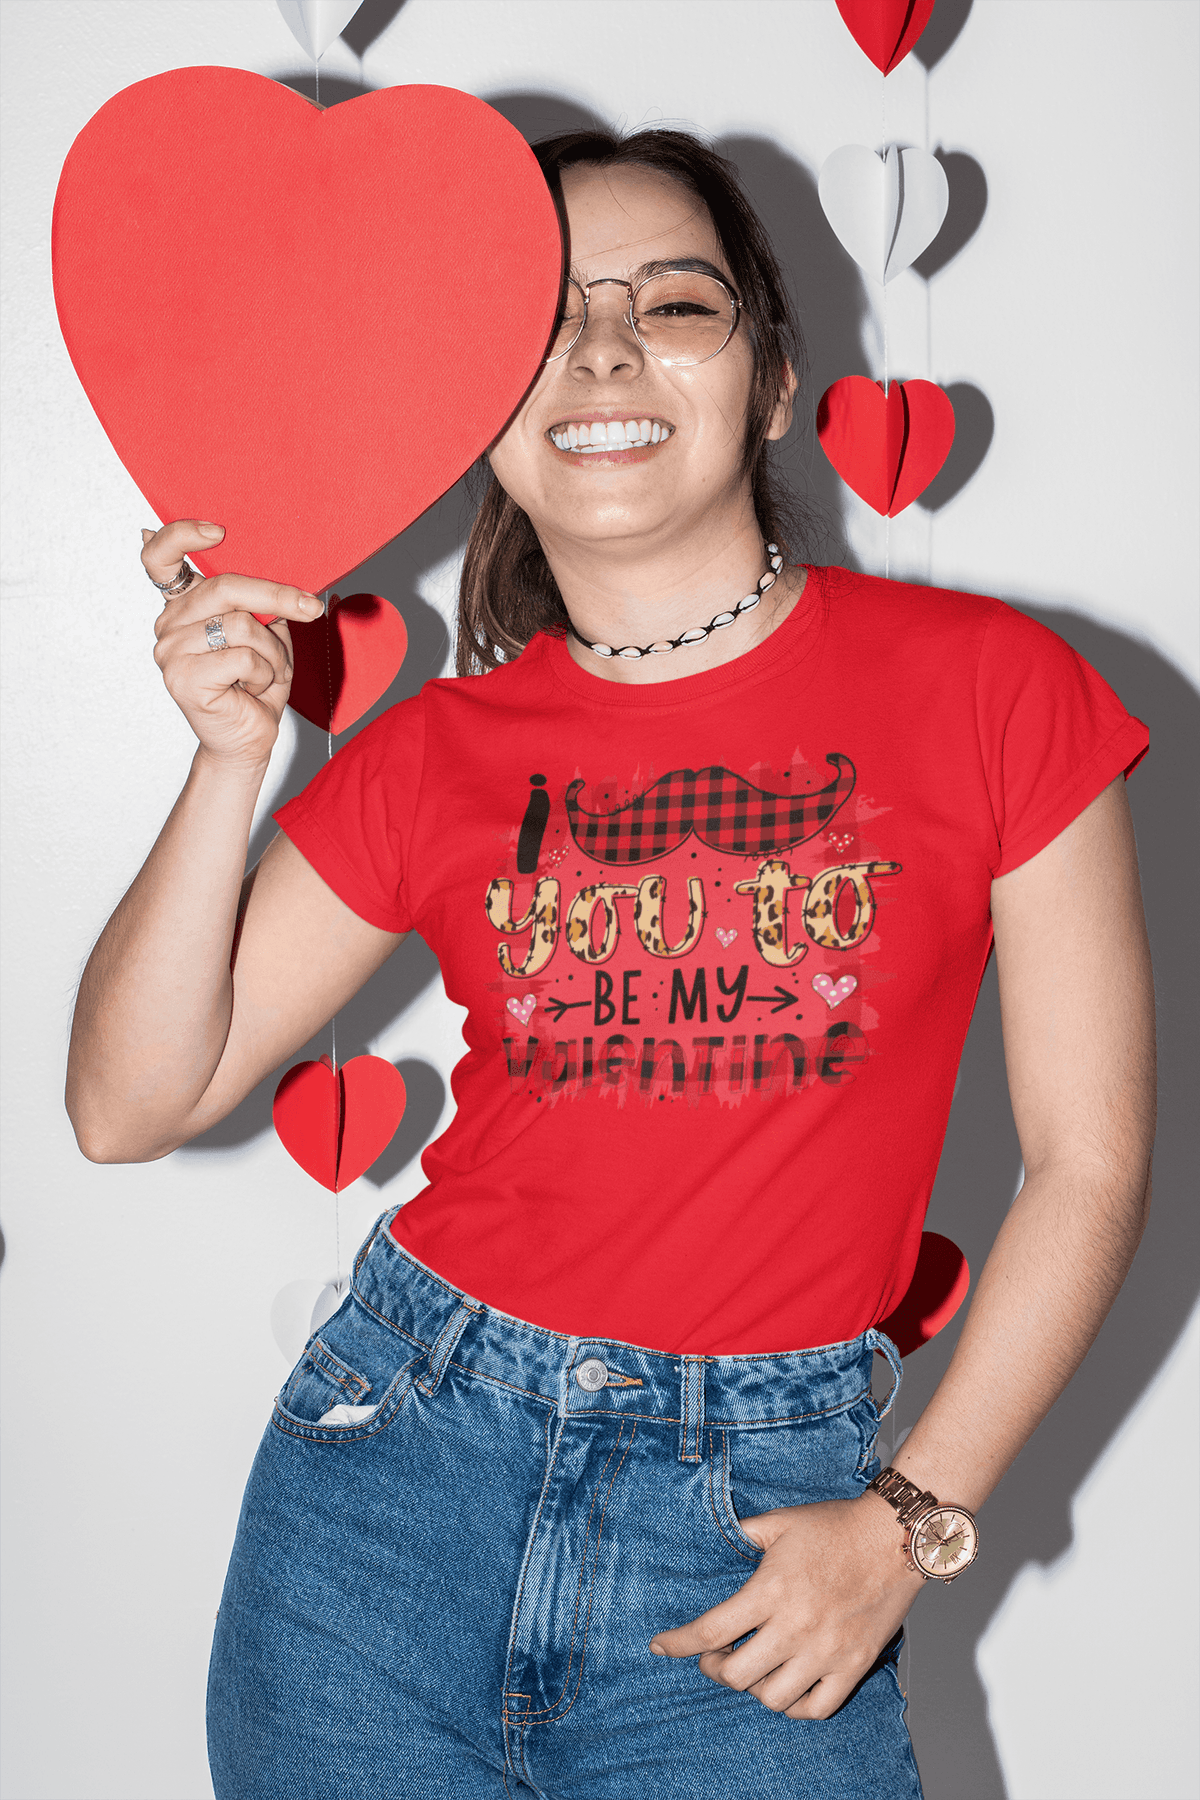 YOU TO BE MY VALENTINE T-shirt - StylinArt